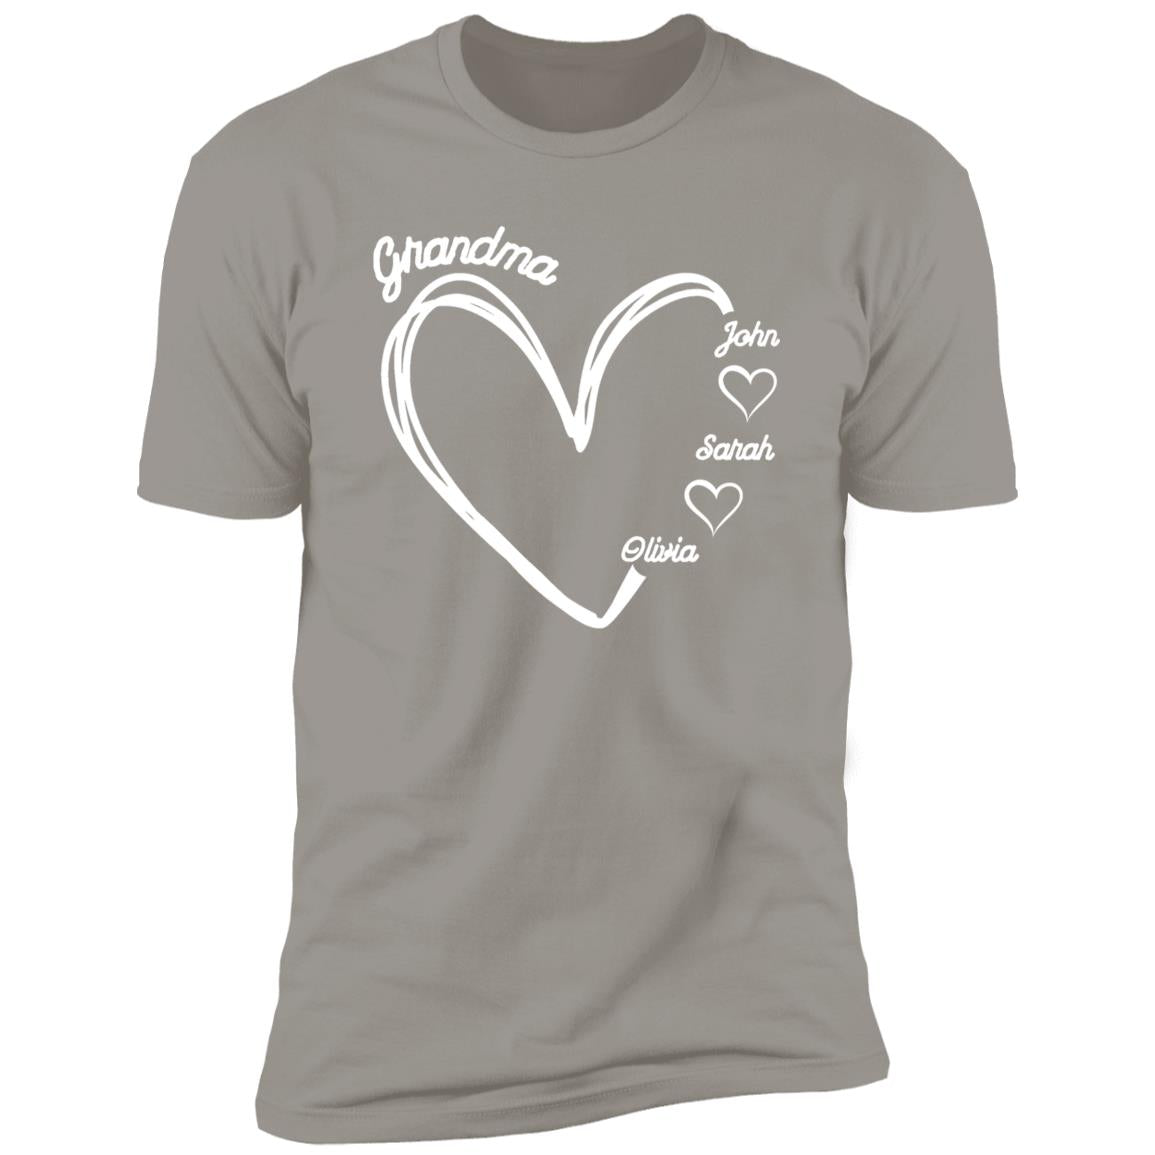 Gift For Grandma With Personalize Names -Short Sleeve Tee (Almost Gone)